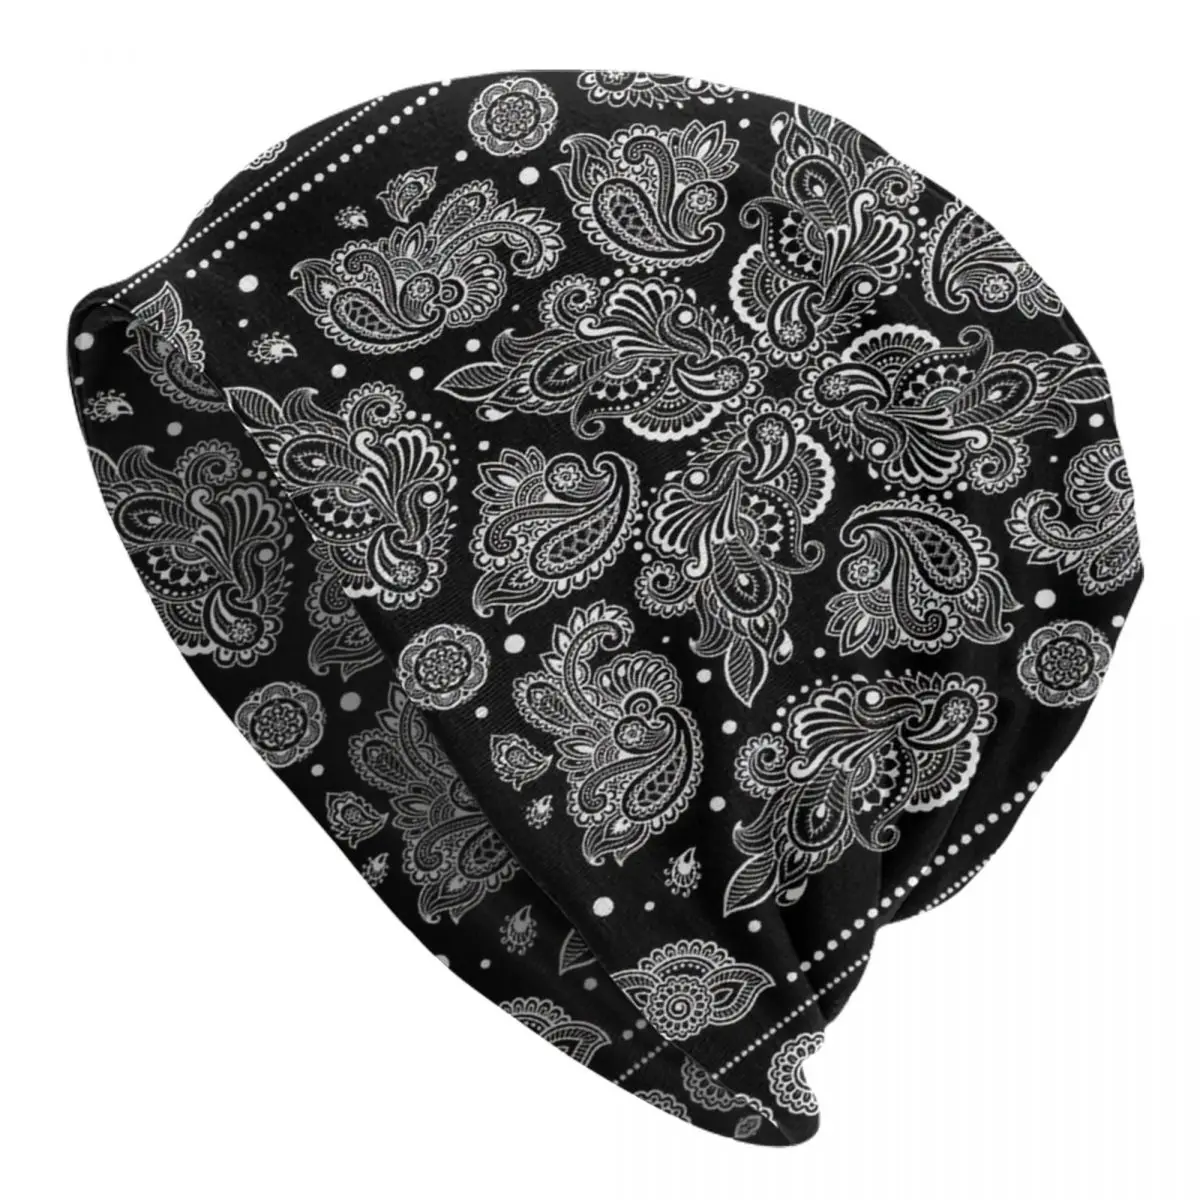 Oriental Paisley Ornament Black And White Adult Men's Women's Knit Hat Keep warm winter knitted hat